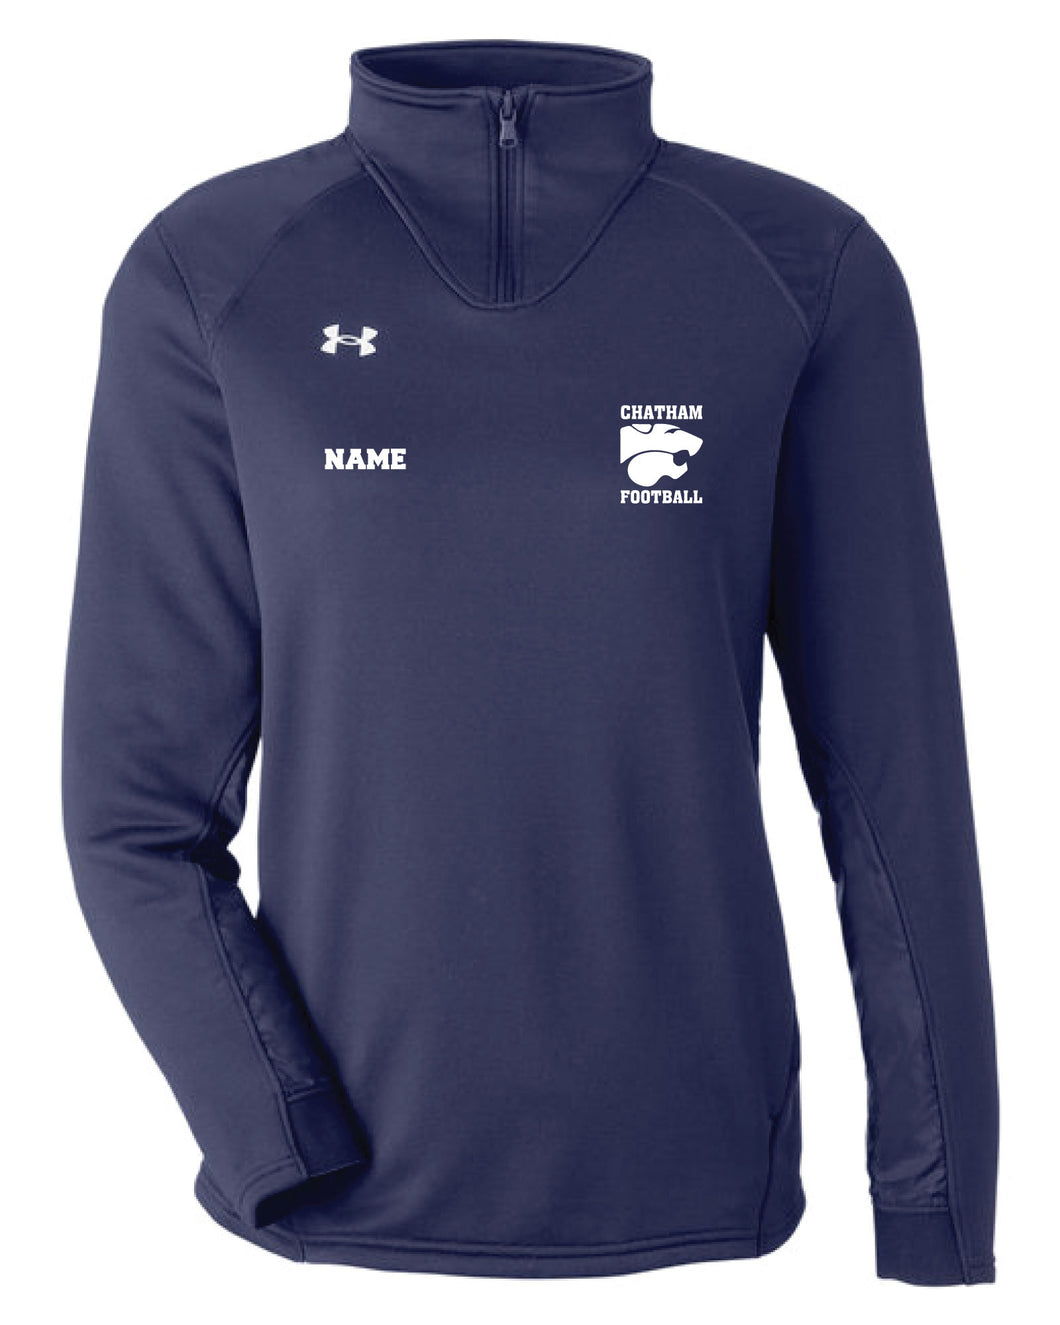 Chatham Football Under Armour Ladies' Qtr Zip - Navy